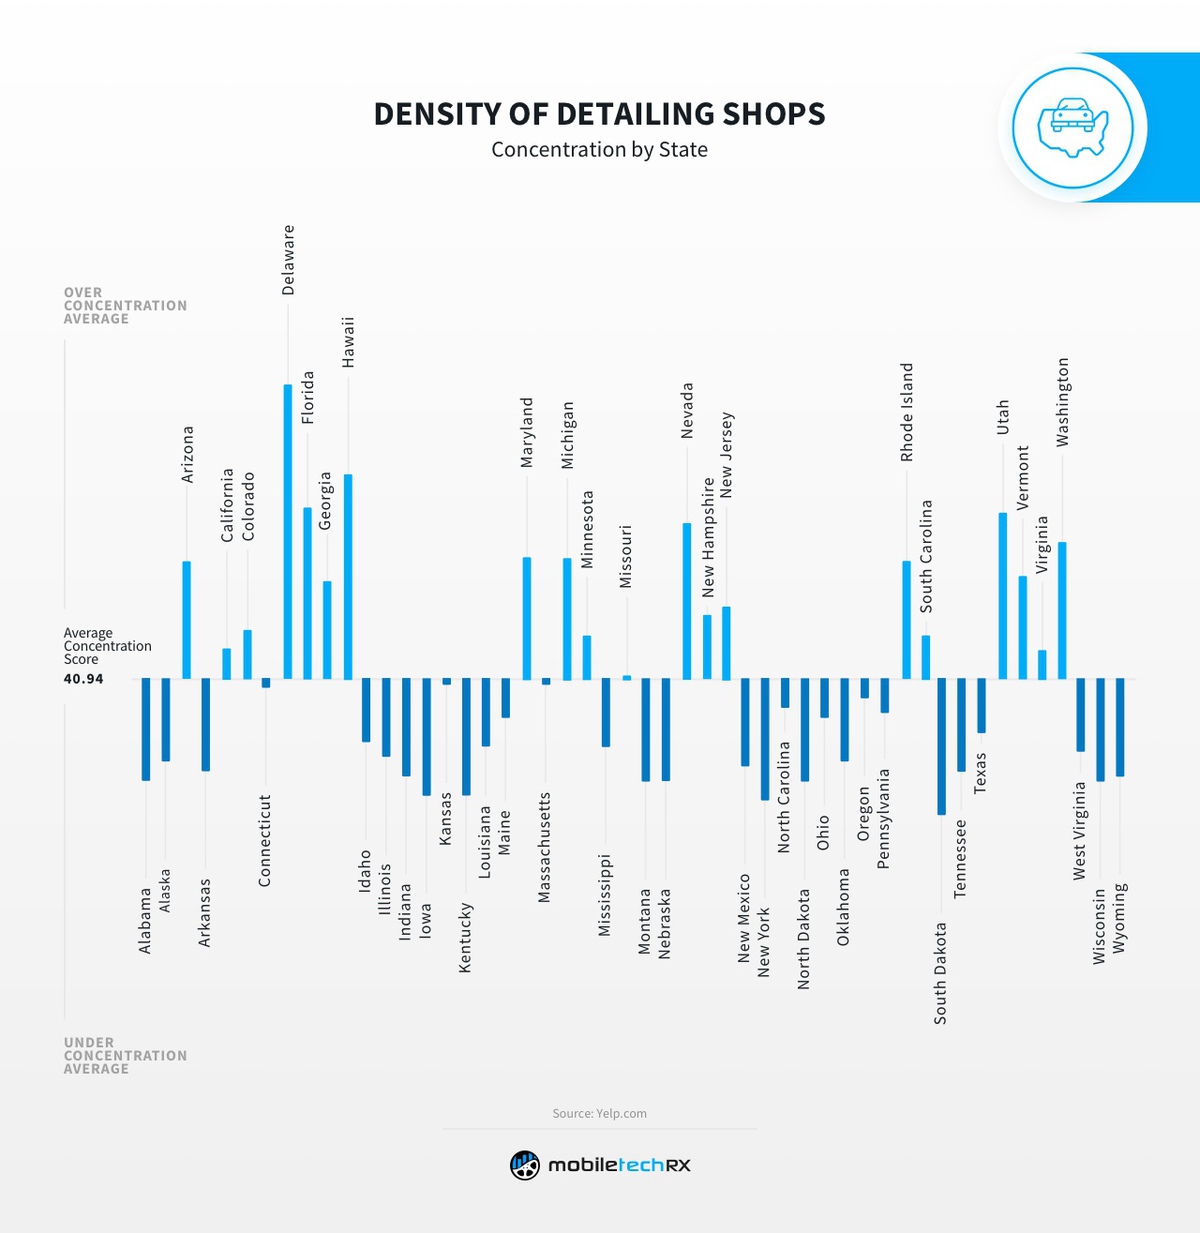 density of detailing shops by state bar graph